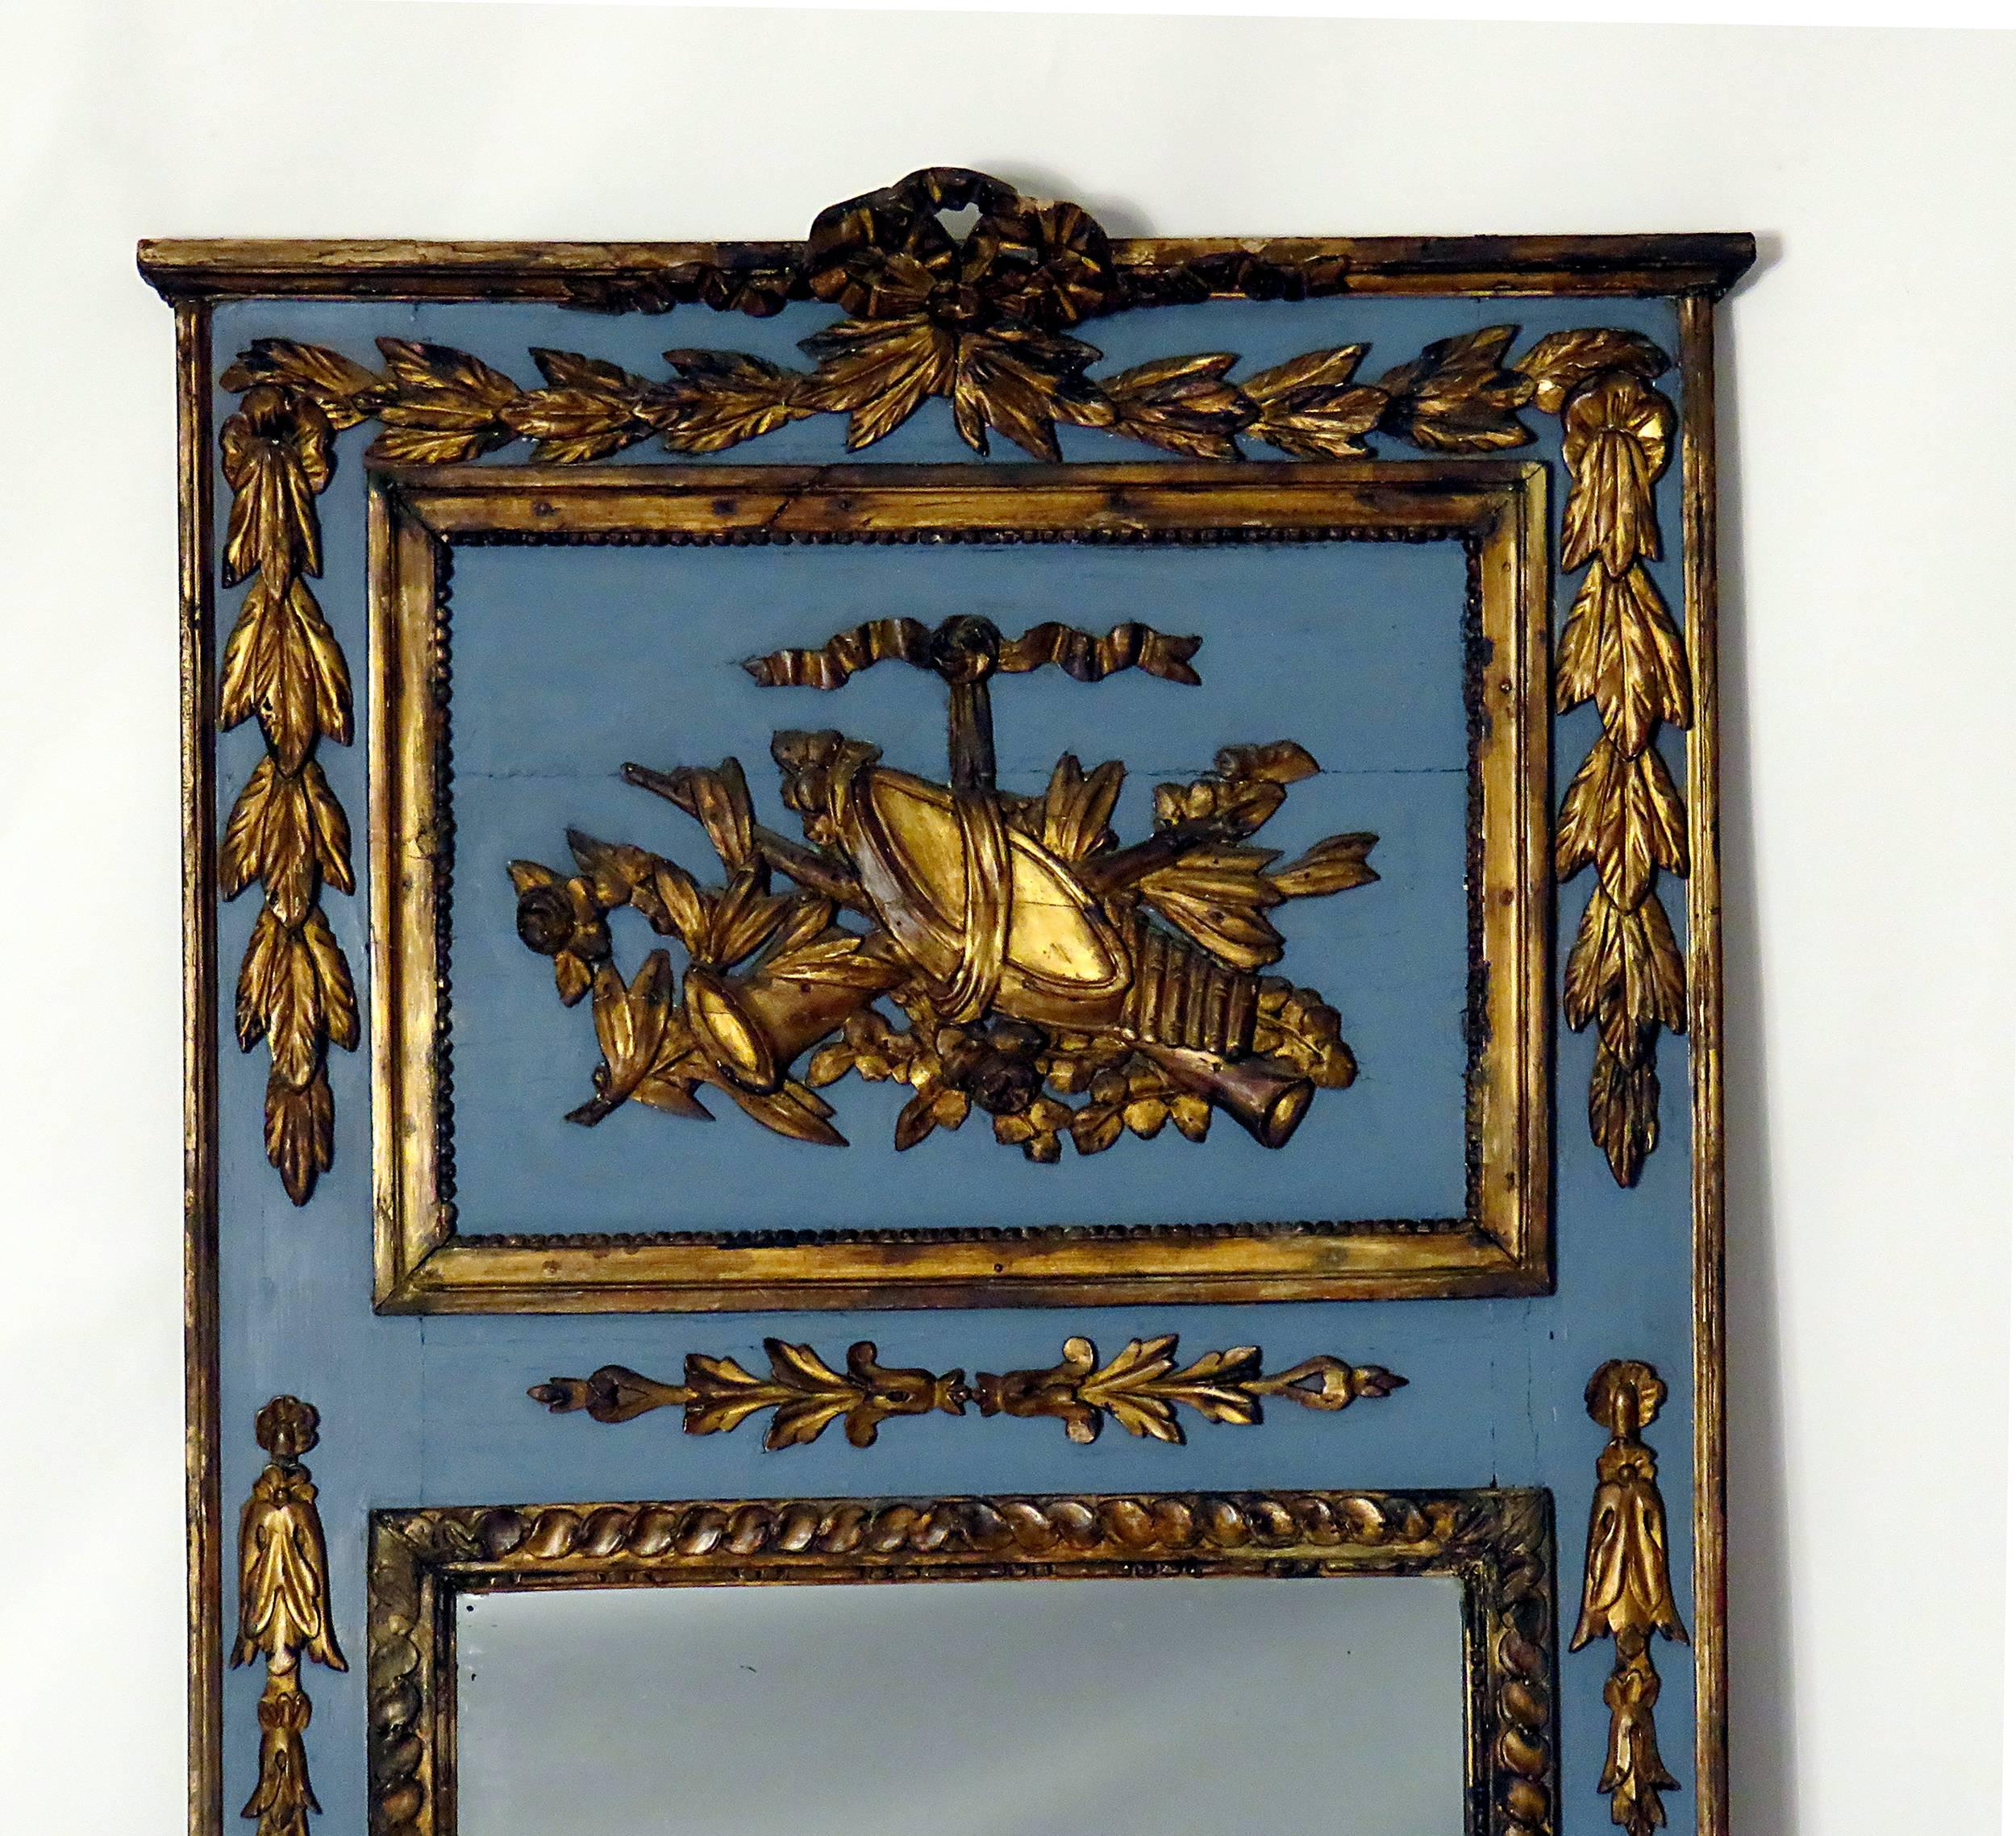 A handsome neoclassical mirror made in Sweden or France during the first part of the 19th century. The raised and gilt decoration is carved solid wood with some wear and old repairs to gilding along with some shrinkage. We loved the rich blue and